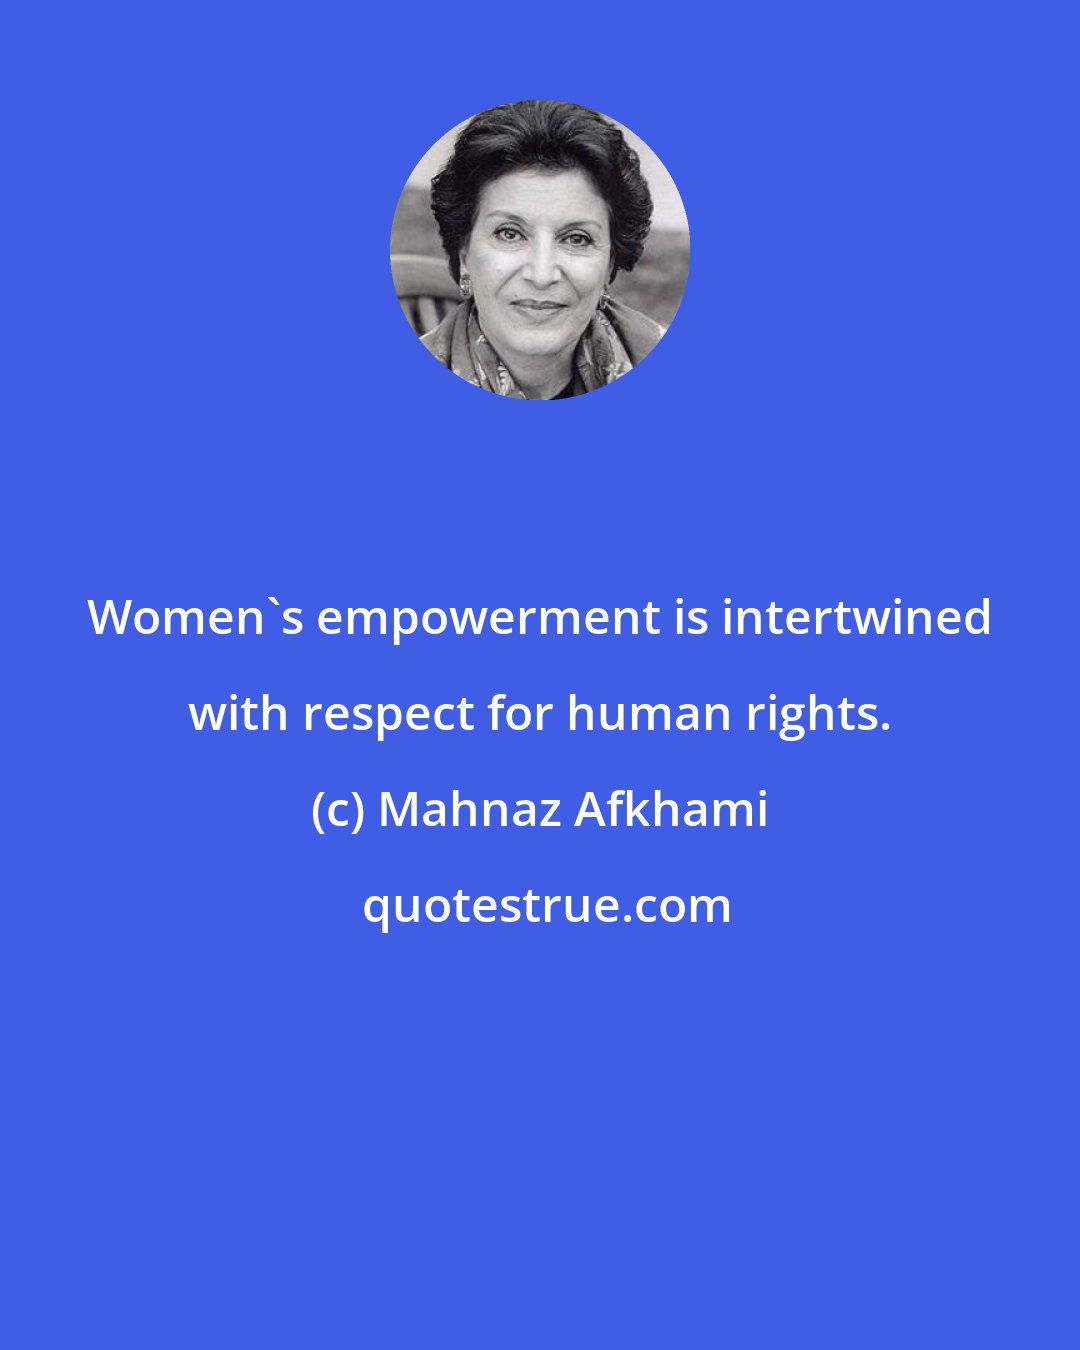 Mahnaz Afkhami: Women's empowerment is intertwined with respect for human rights.